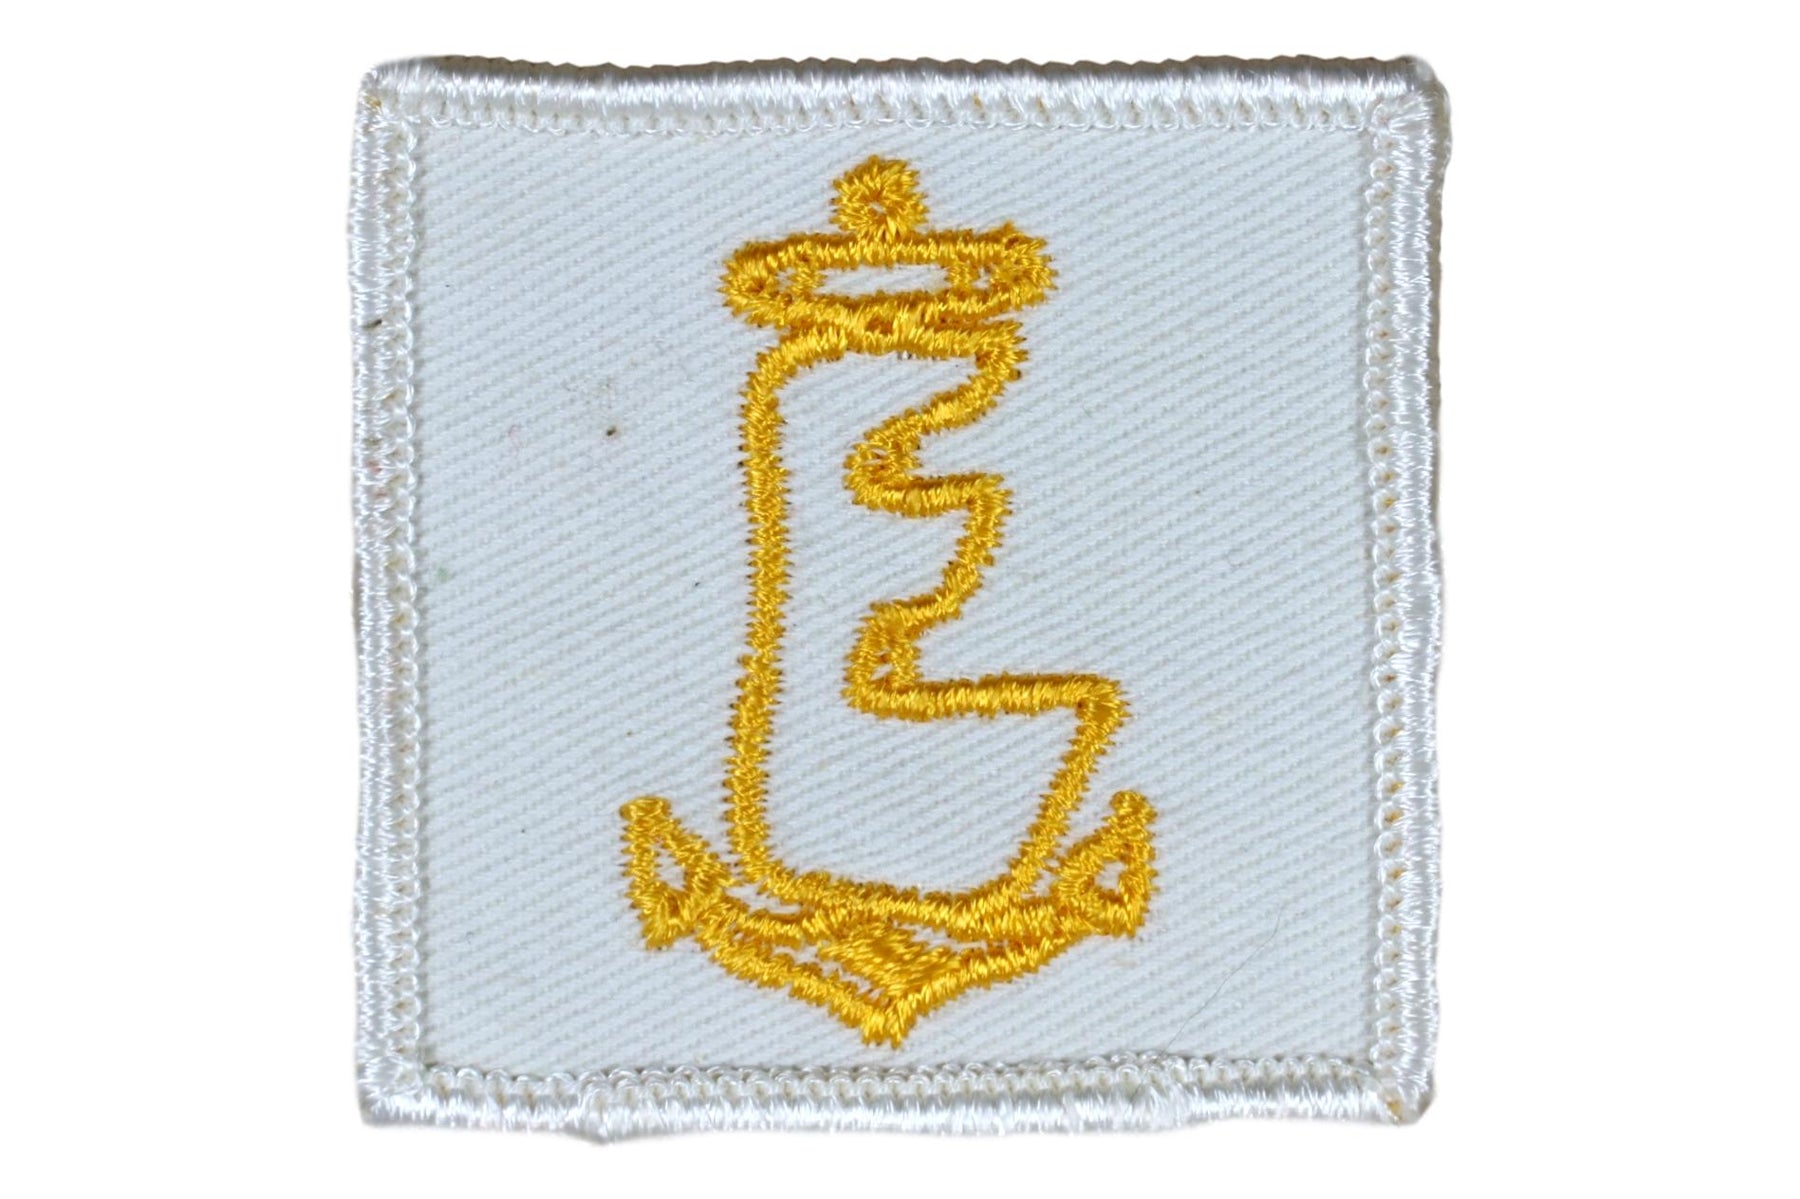 Sea Explorer Universal Patch on White Yellow Embroidery